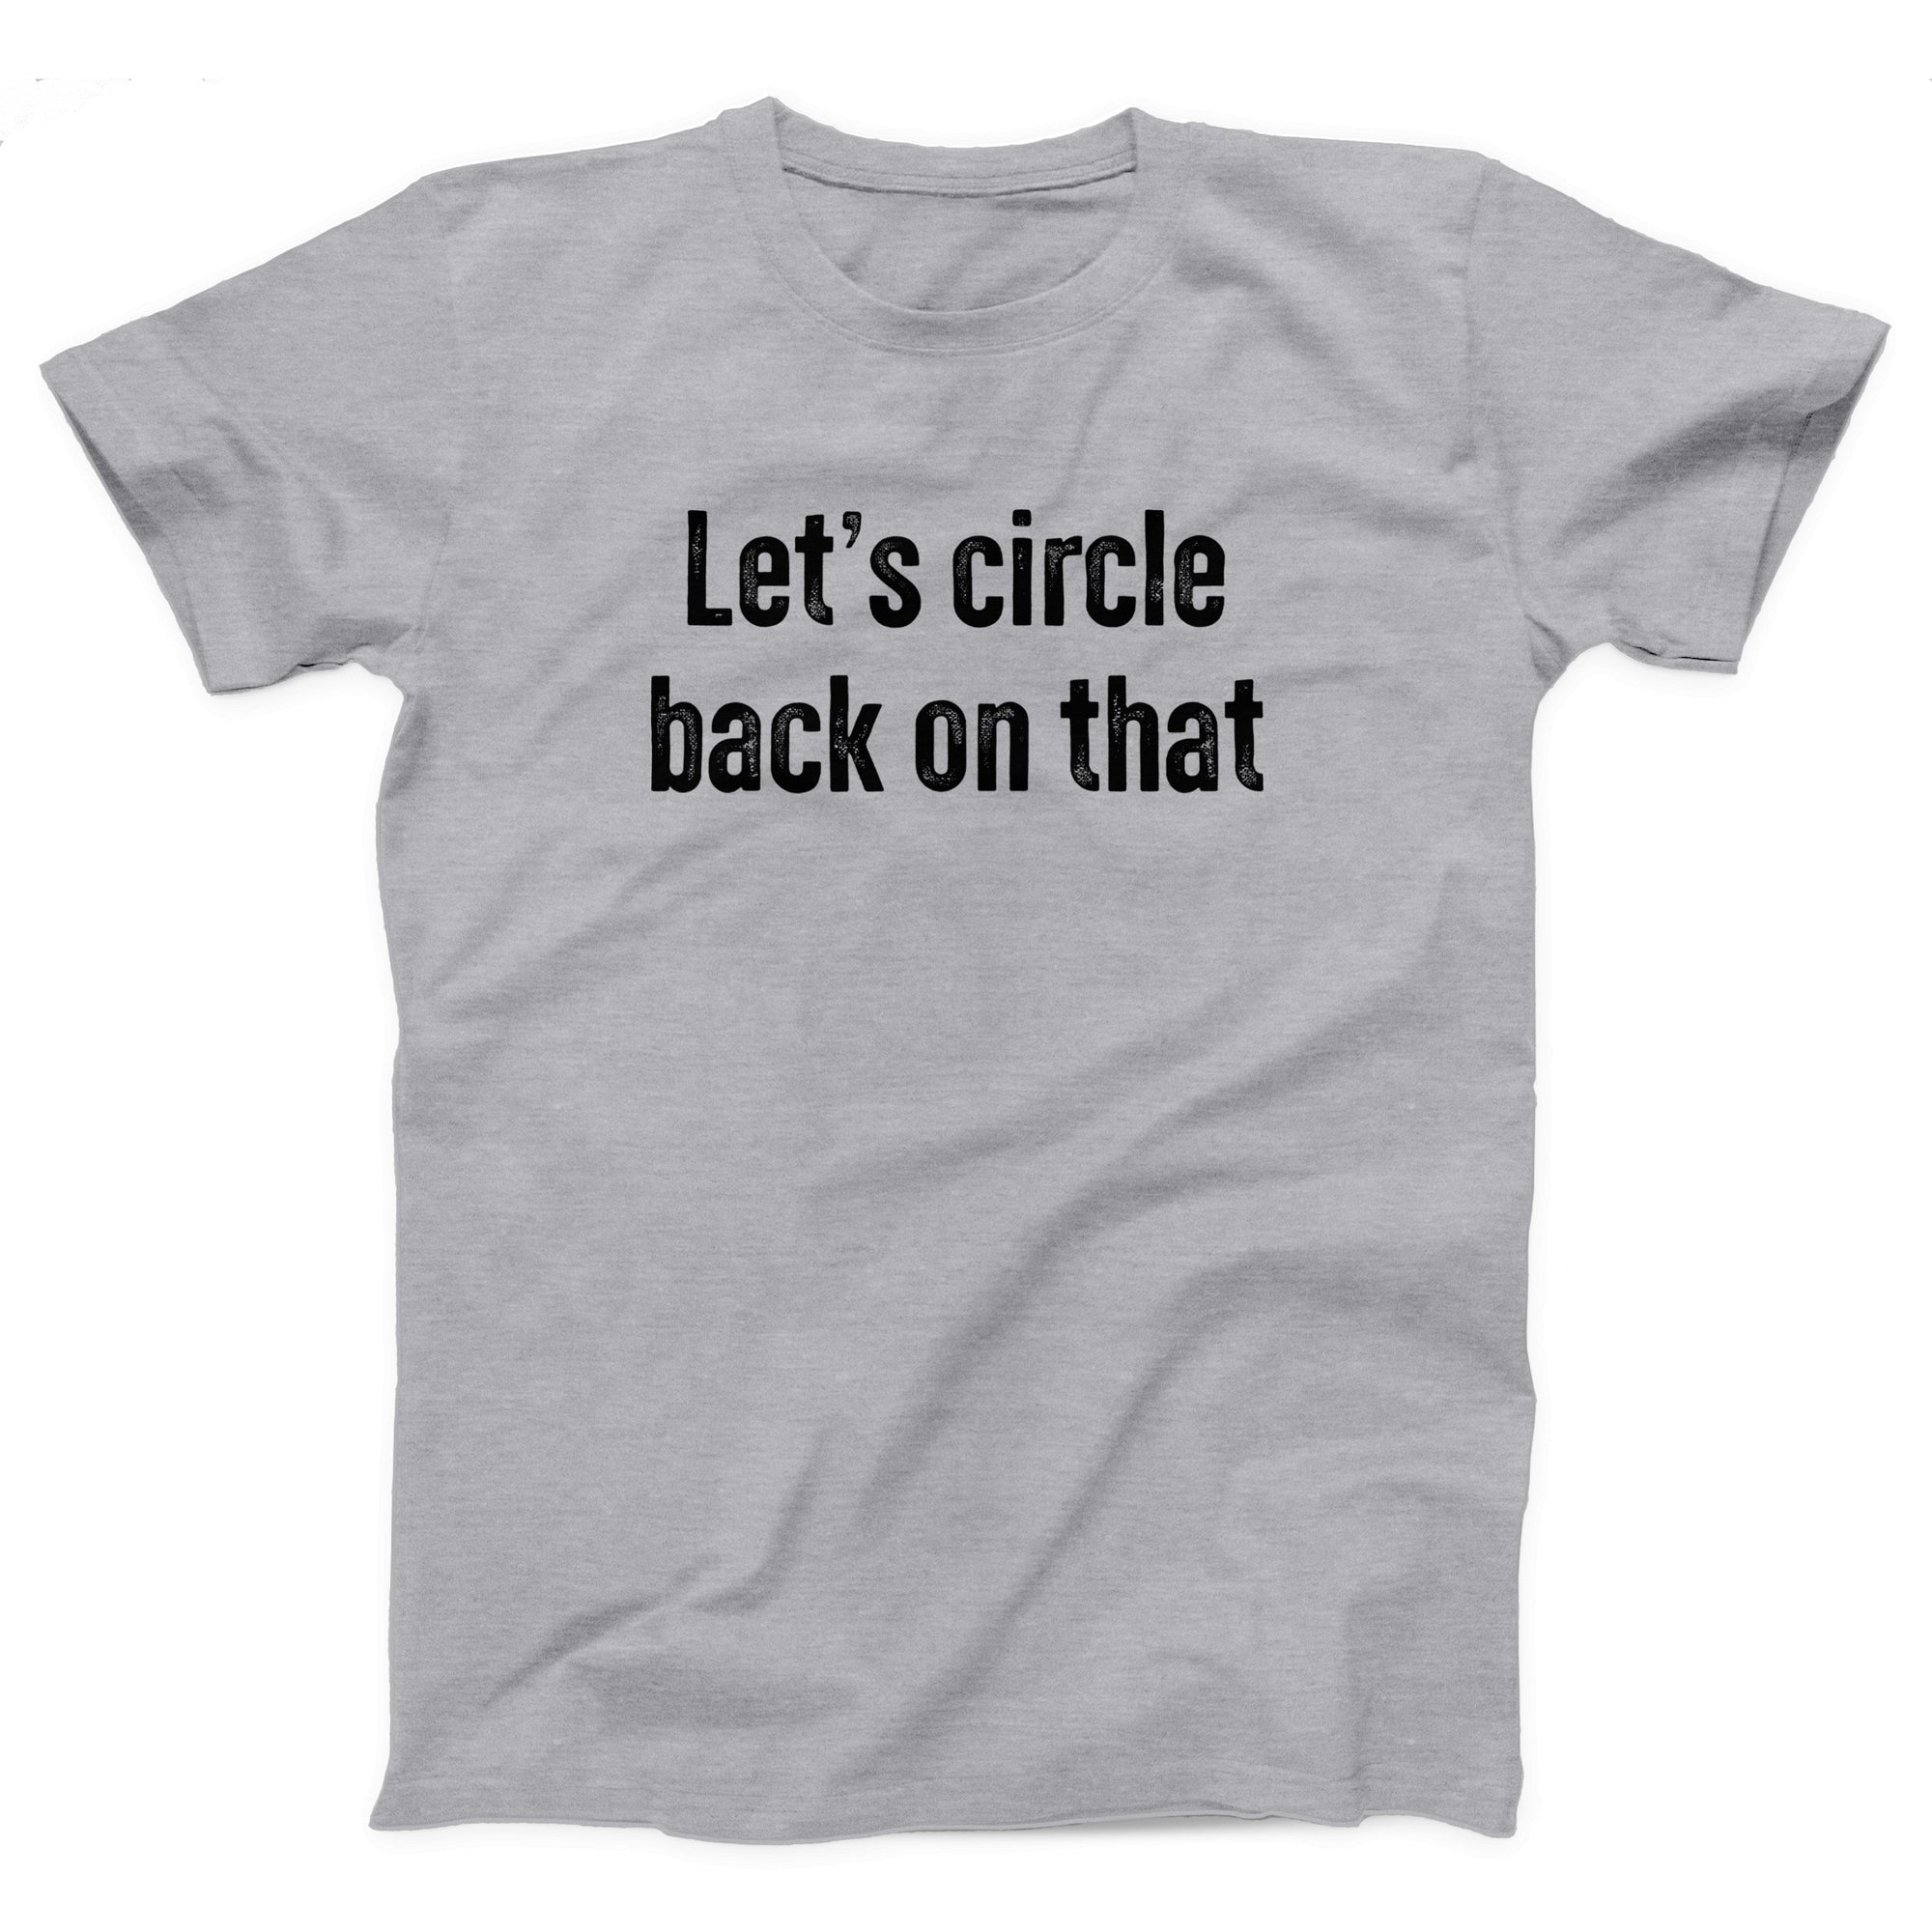 Let's Circle Back On That Adult Unisex T-Shirt - Twisted Gorilla